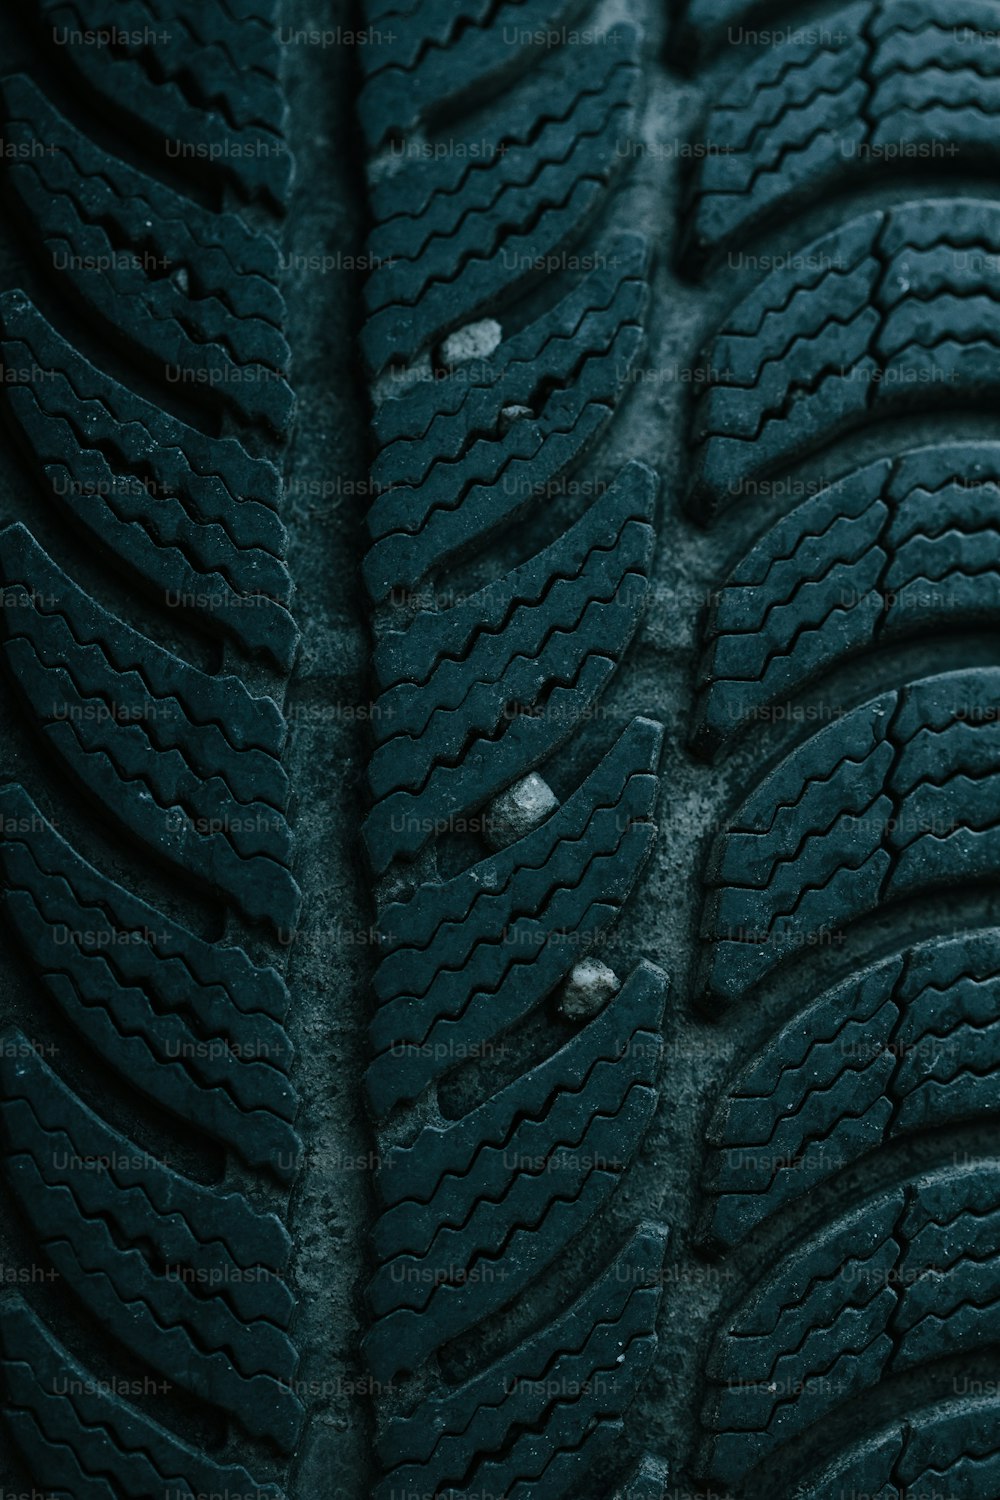 a close up of a tire on a car